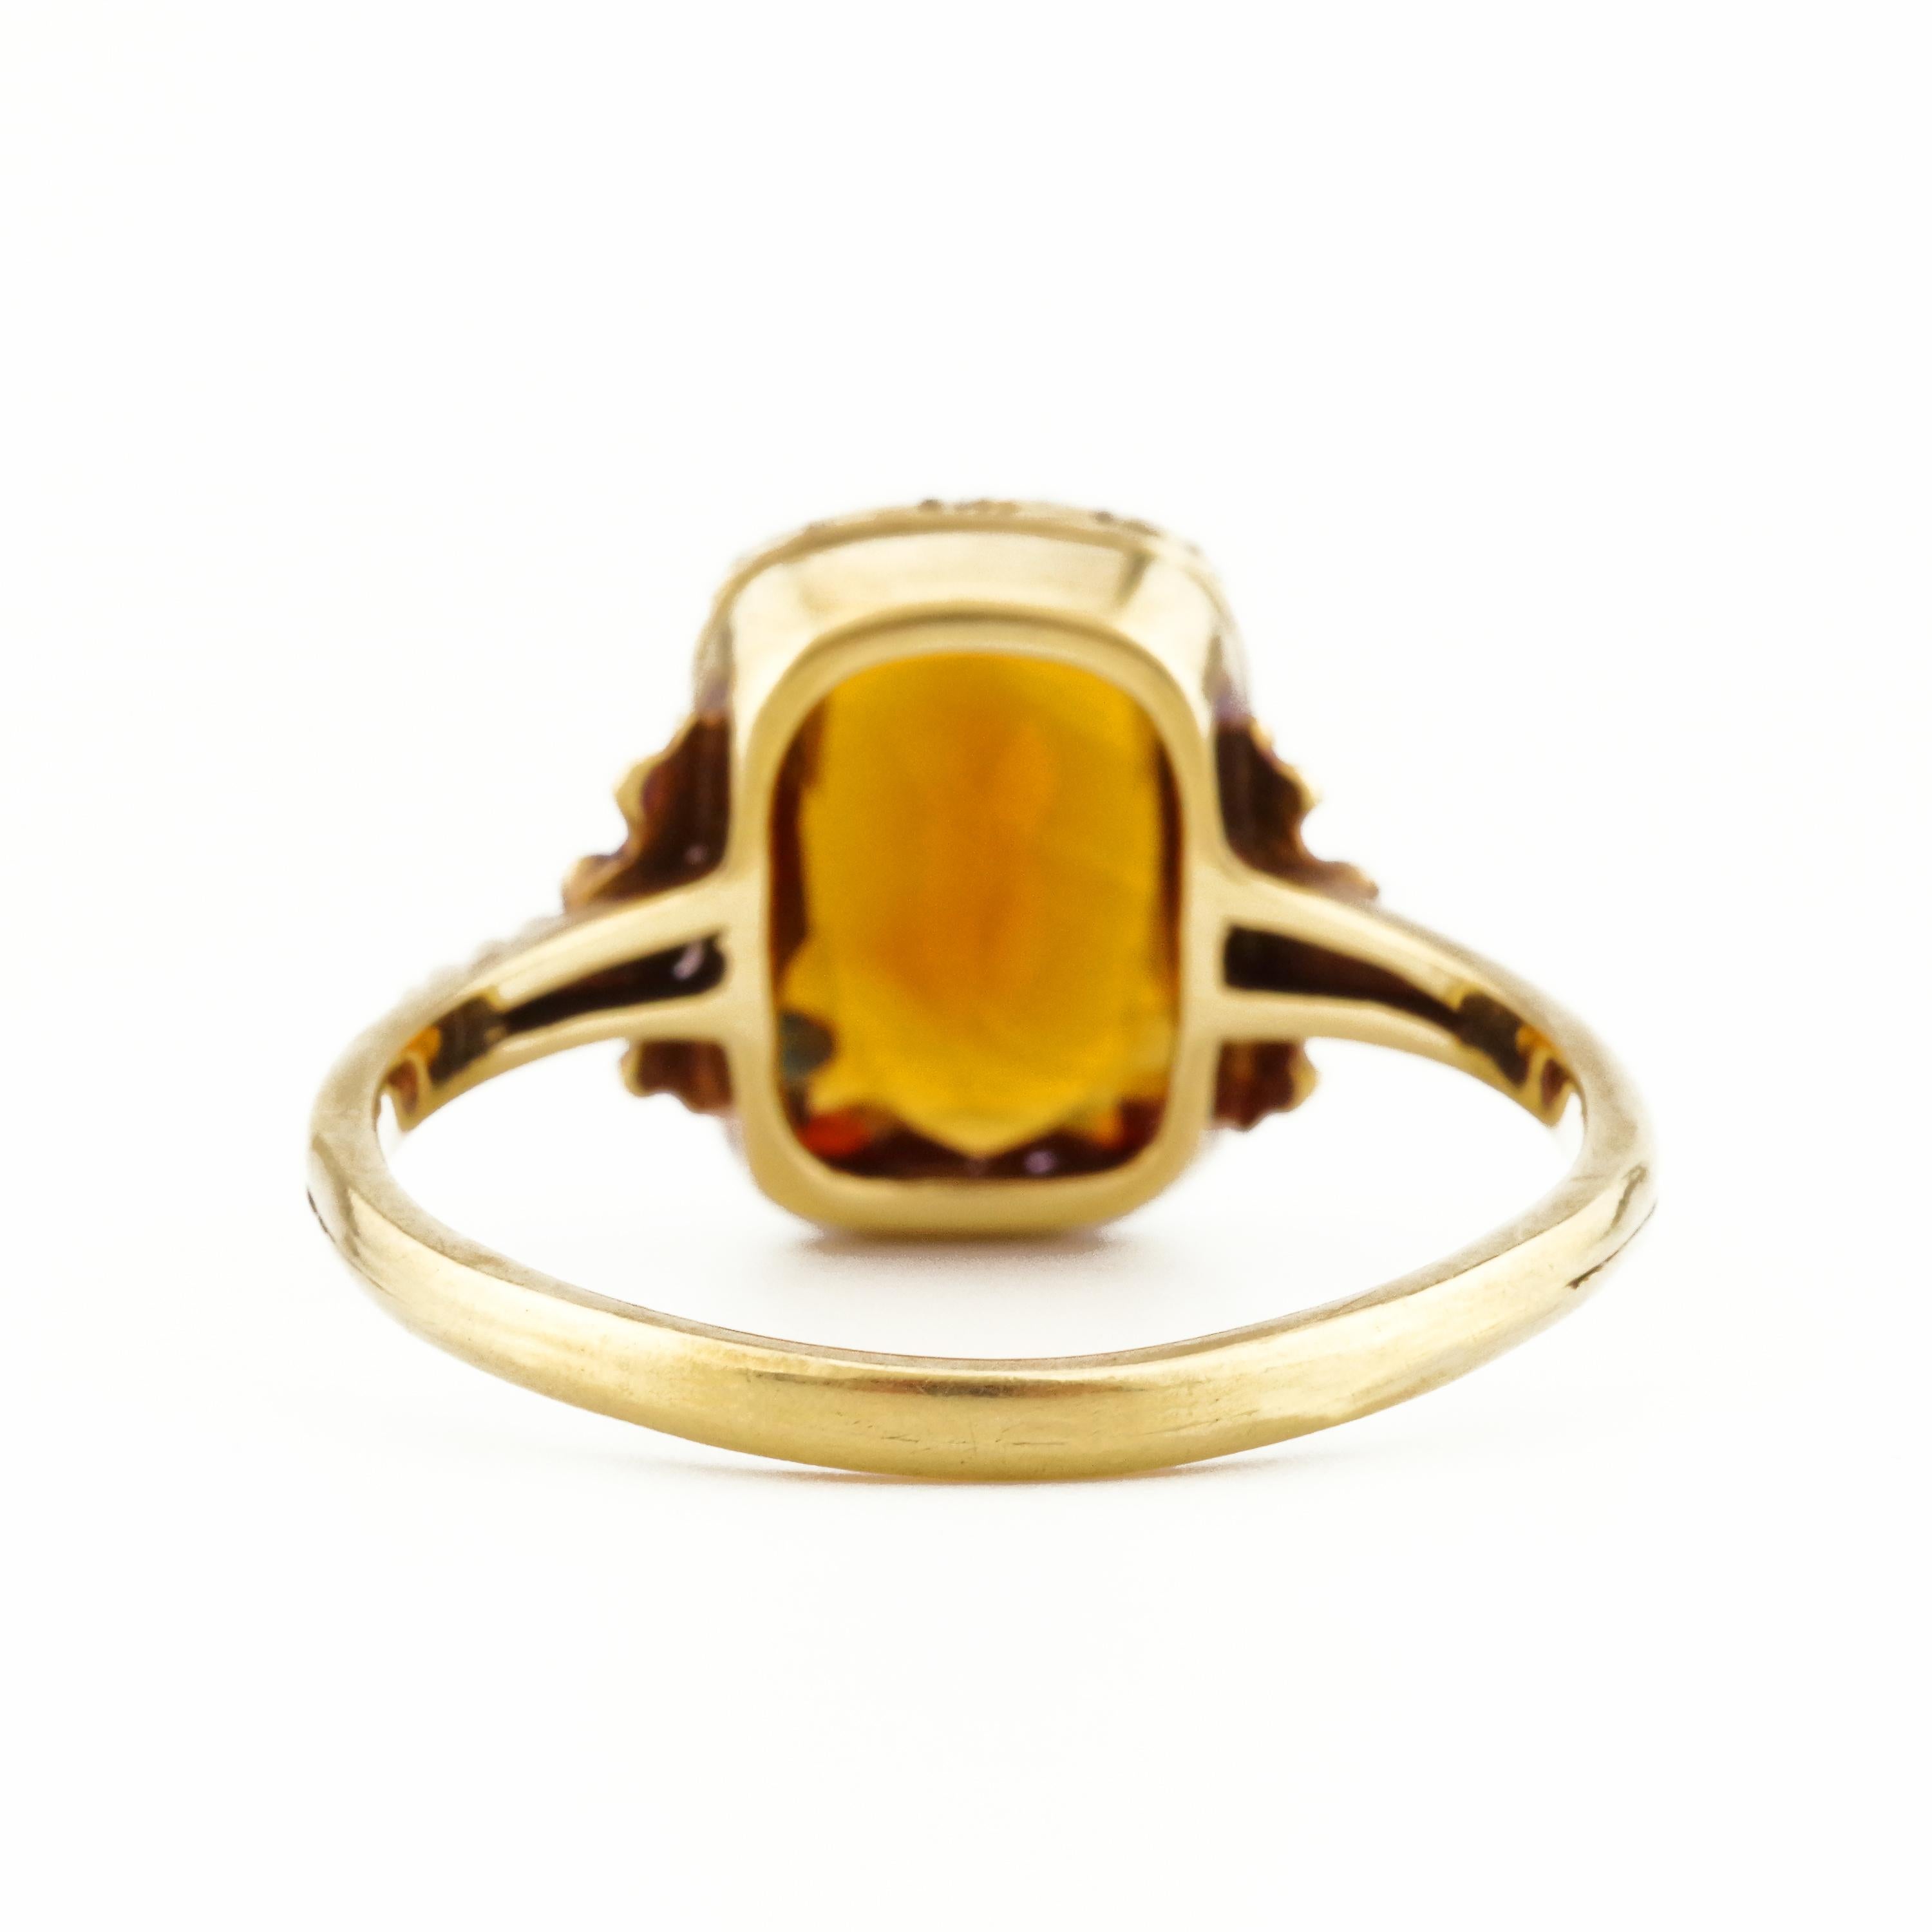 Antique Madeira Citrine Gent's Ring from Europe 4